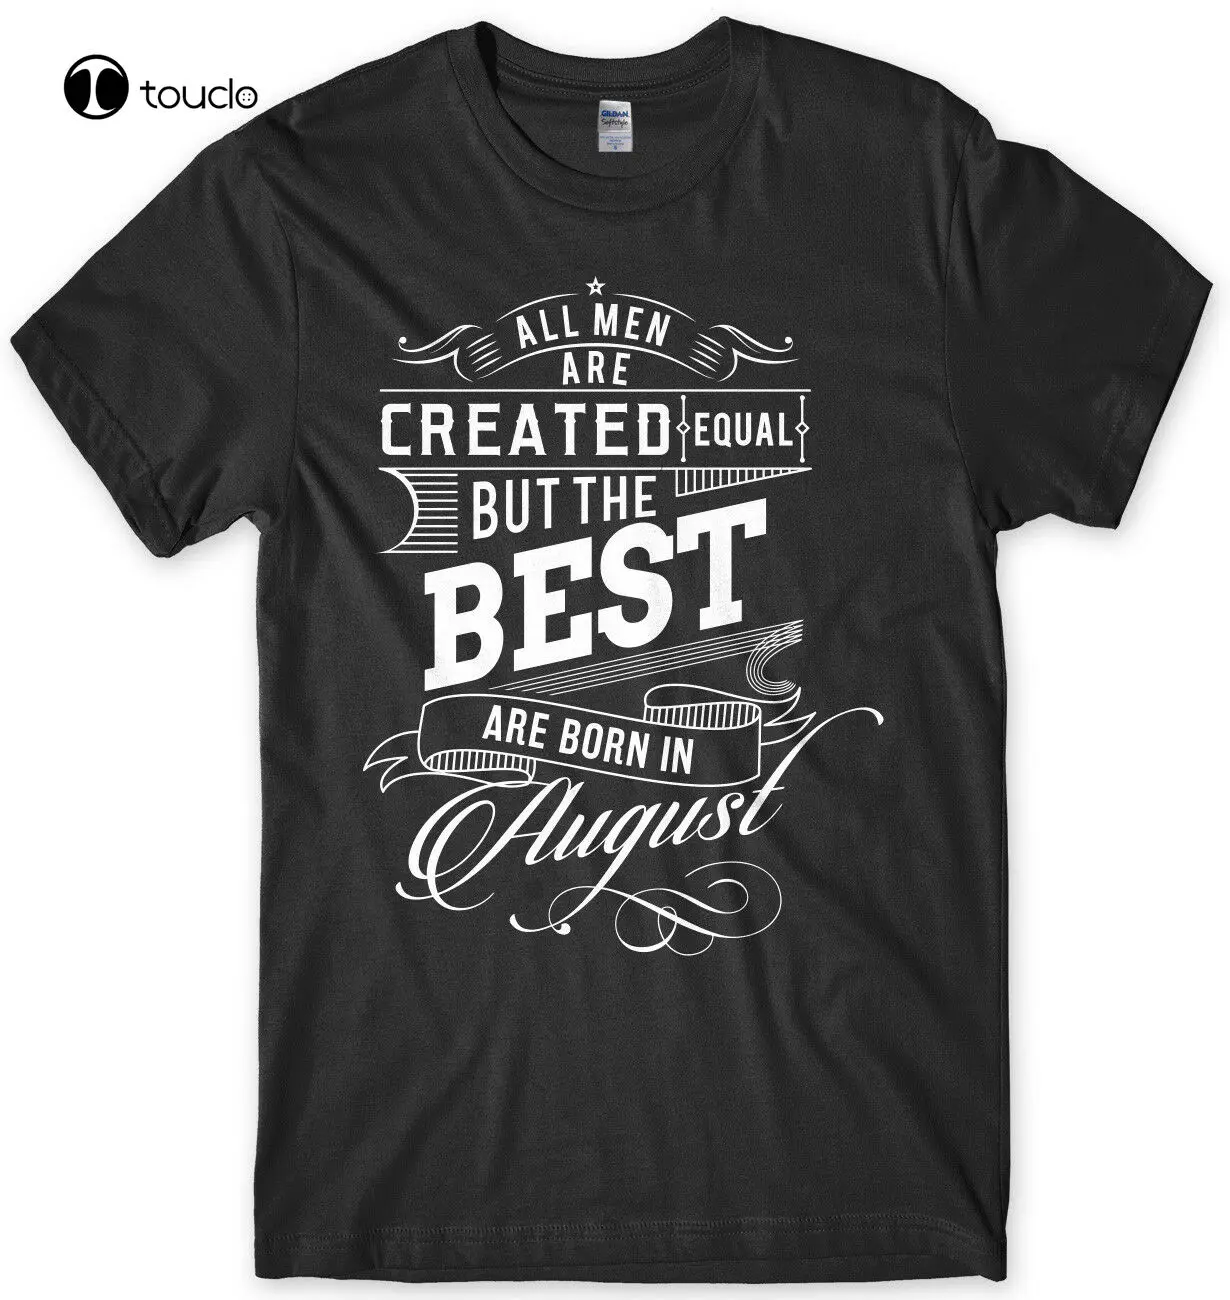 

The Best Are Born In August Birthday Funny Mens Unisex T-Shirt Custom Aldult Teen Unisex Digital Printing Fashion Funny New